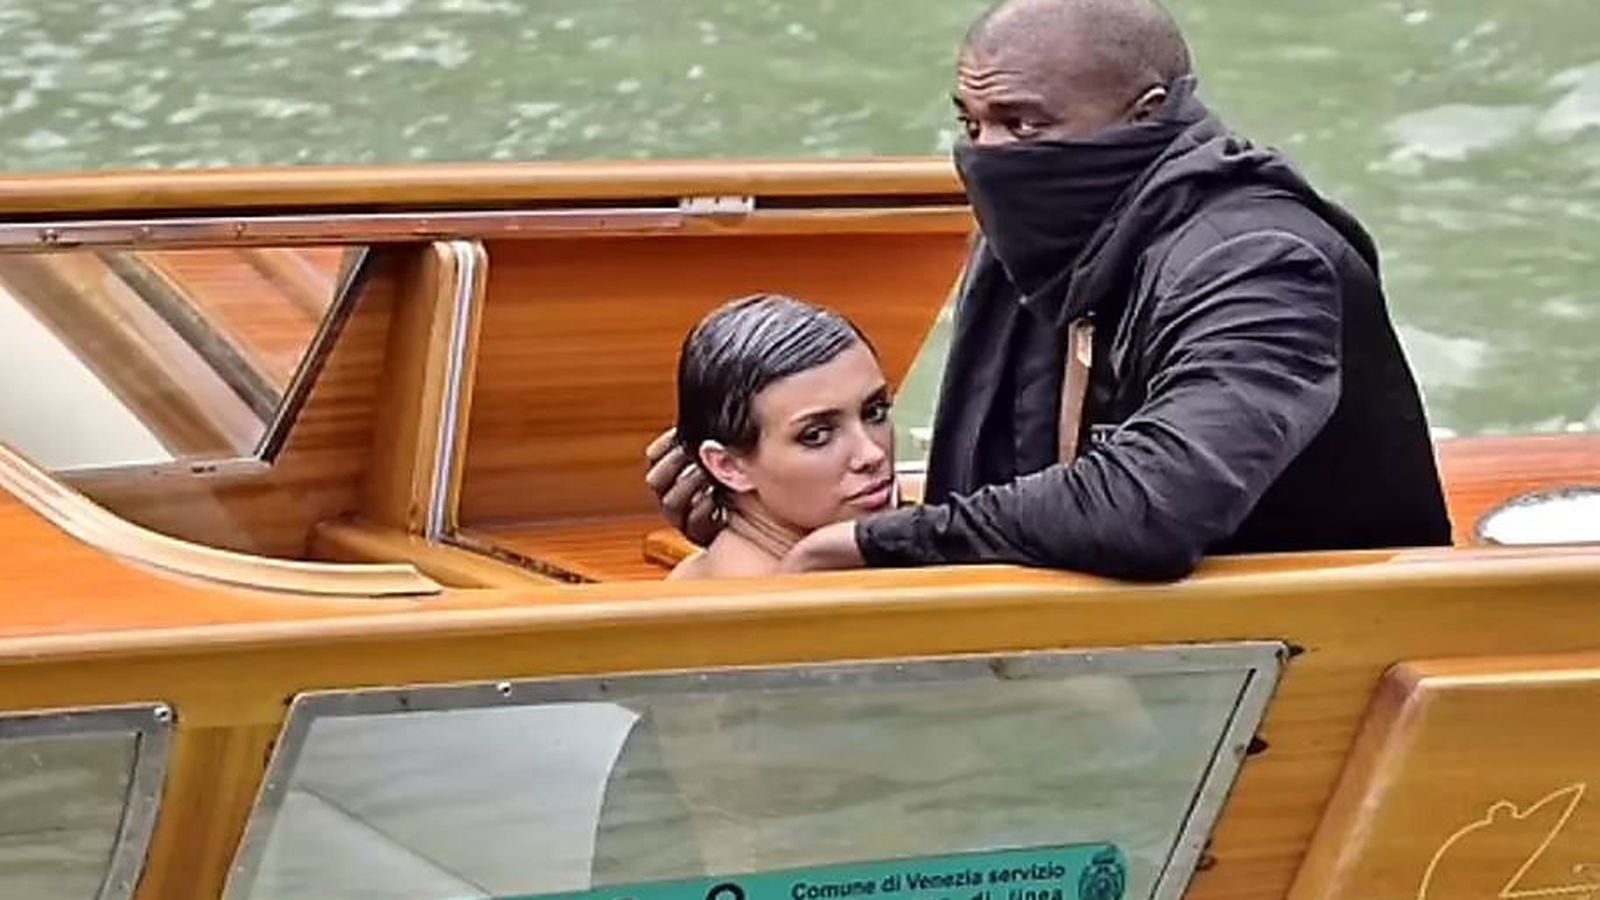 Venice: Kanye West and his wife banned for life for indecent exposure by a speedboat company